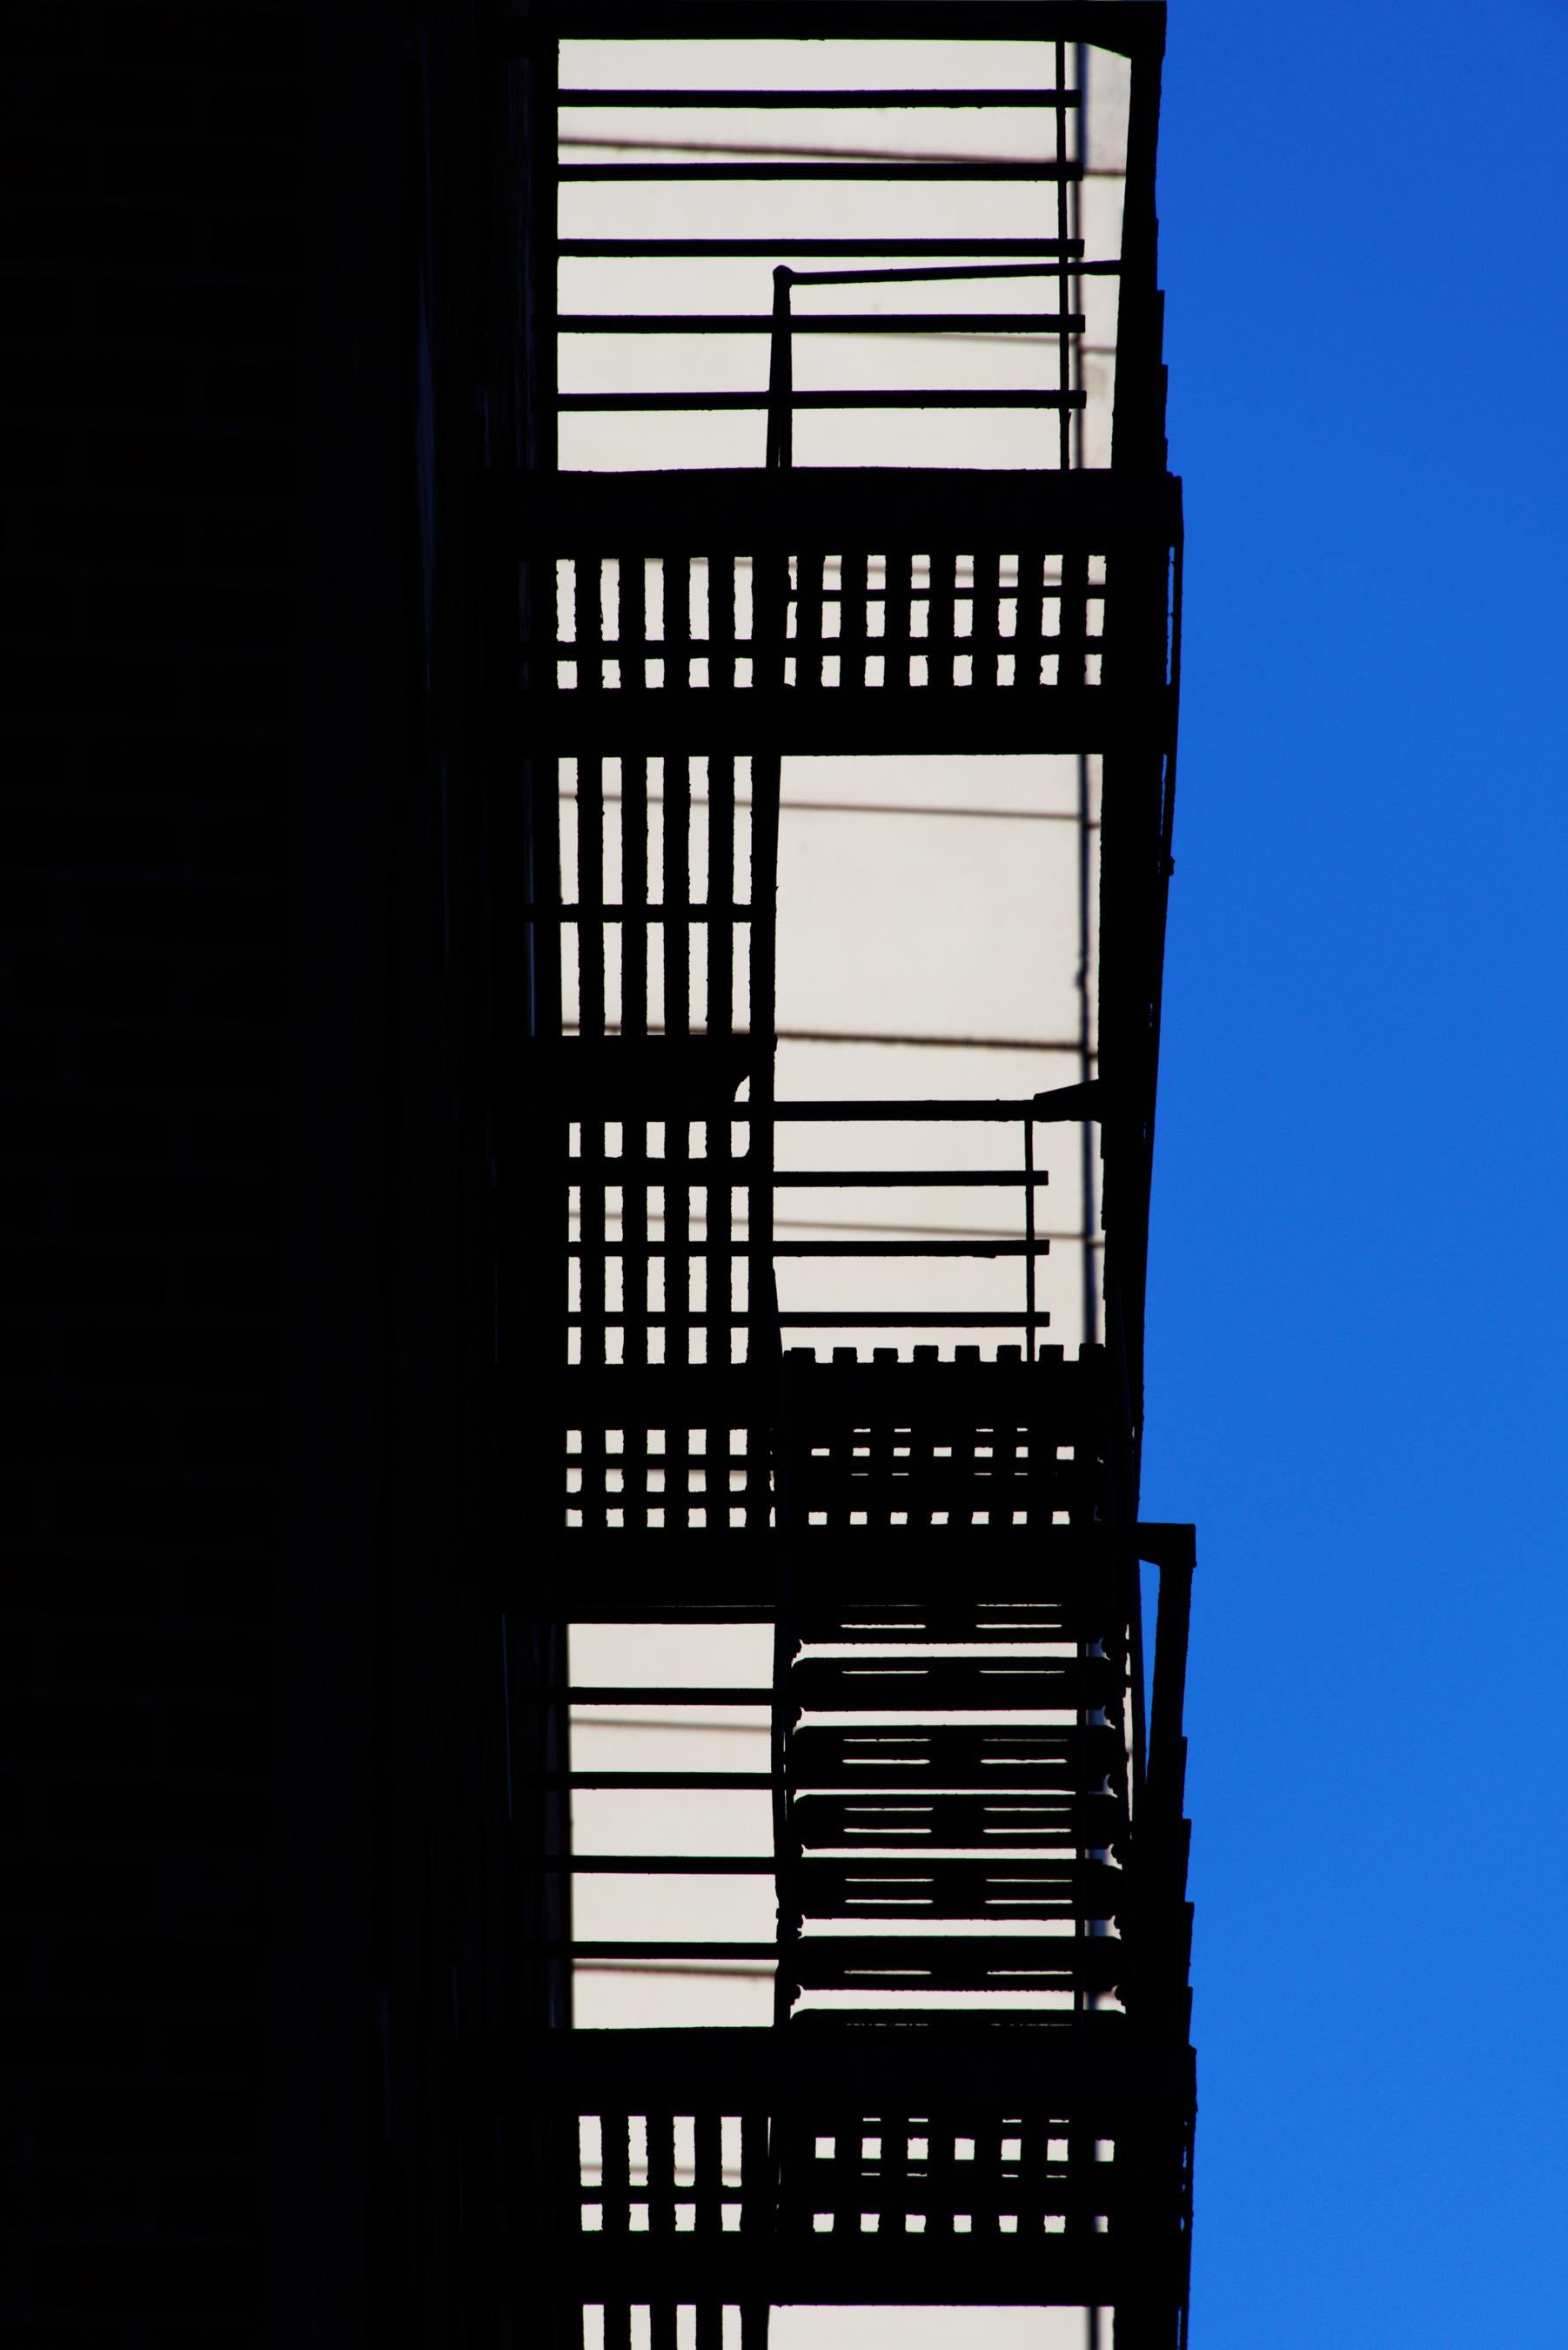 Bob Krasner Color Photograph - "Fire Escape", photography, city, architecture, geometry, pattern, stairs, blue